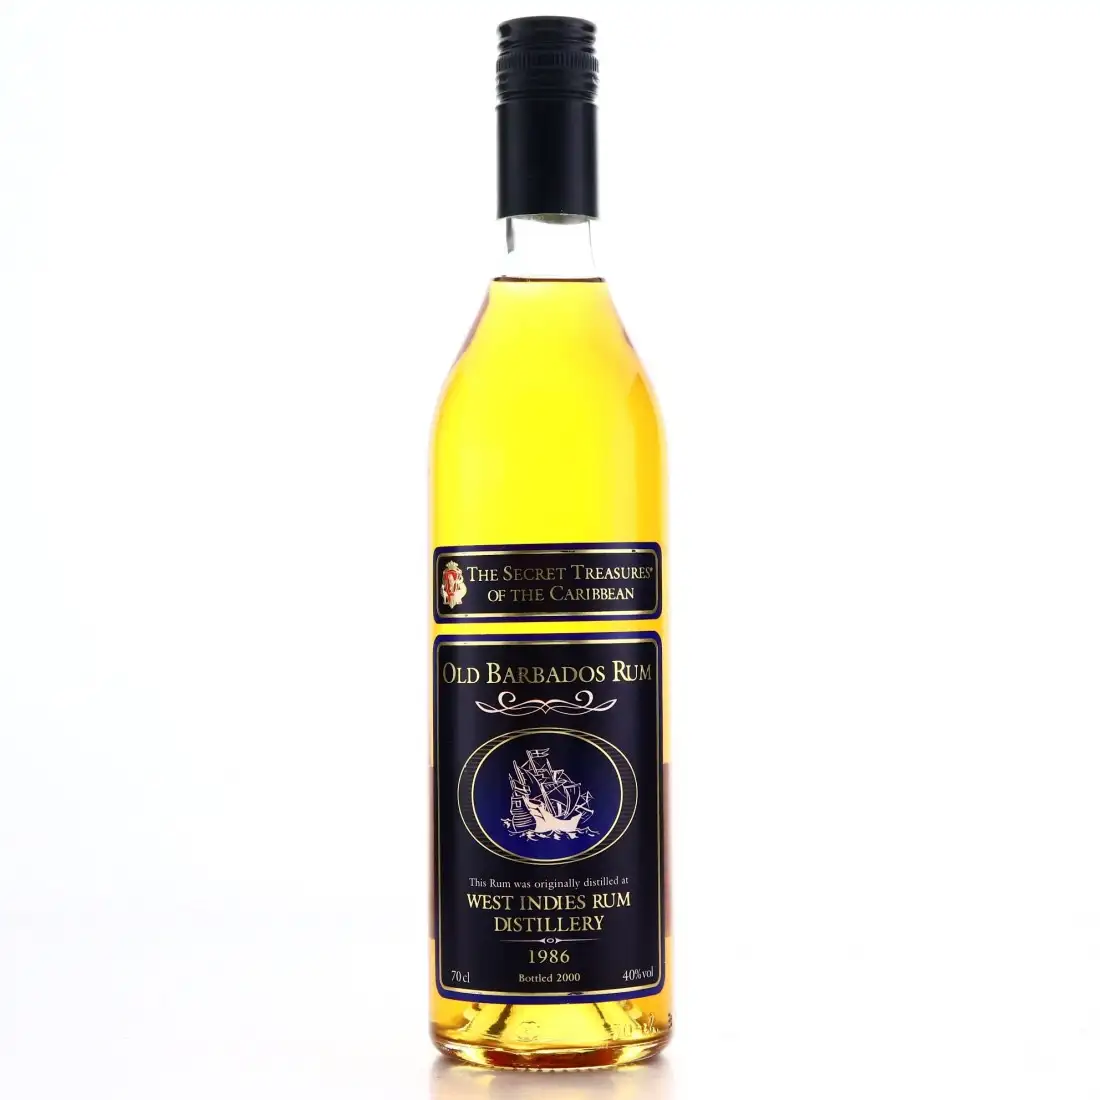 Image of the front of the bottle of the rum Secret Treasures Old Barbados